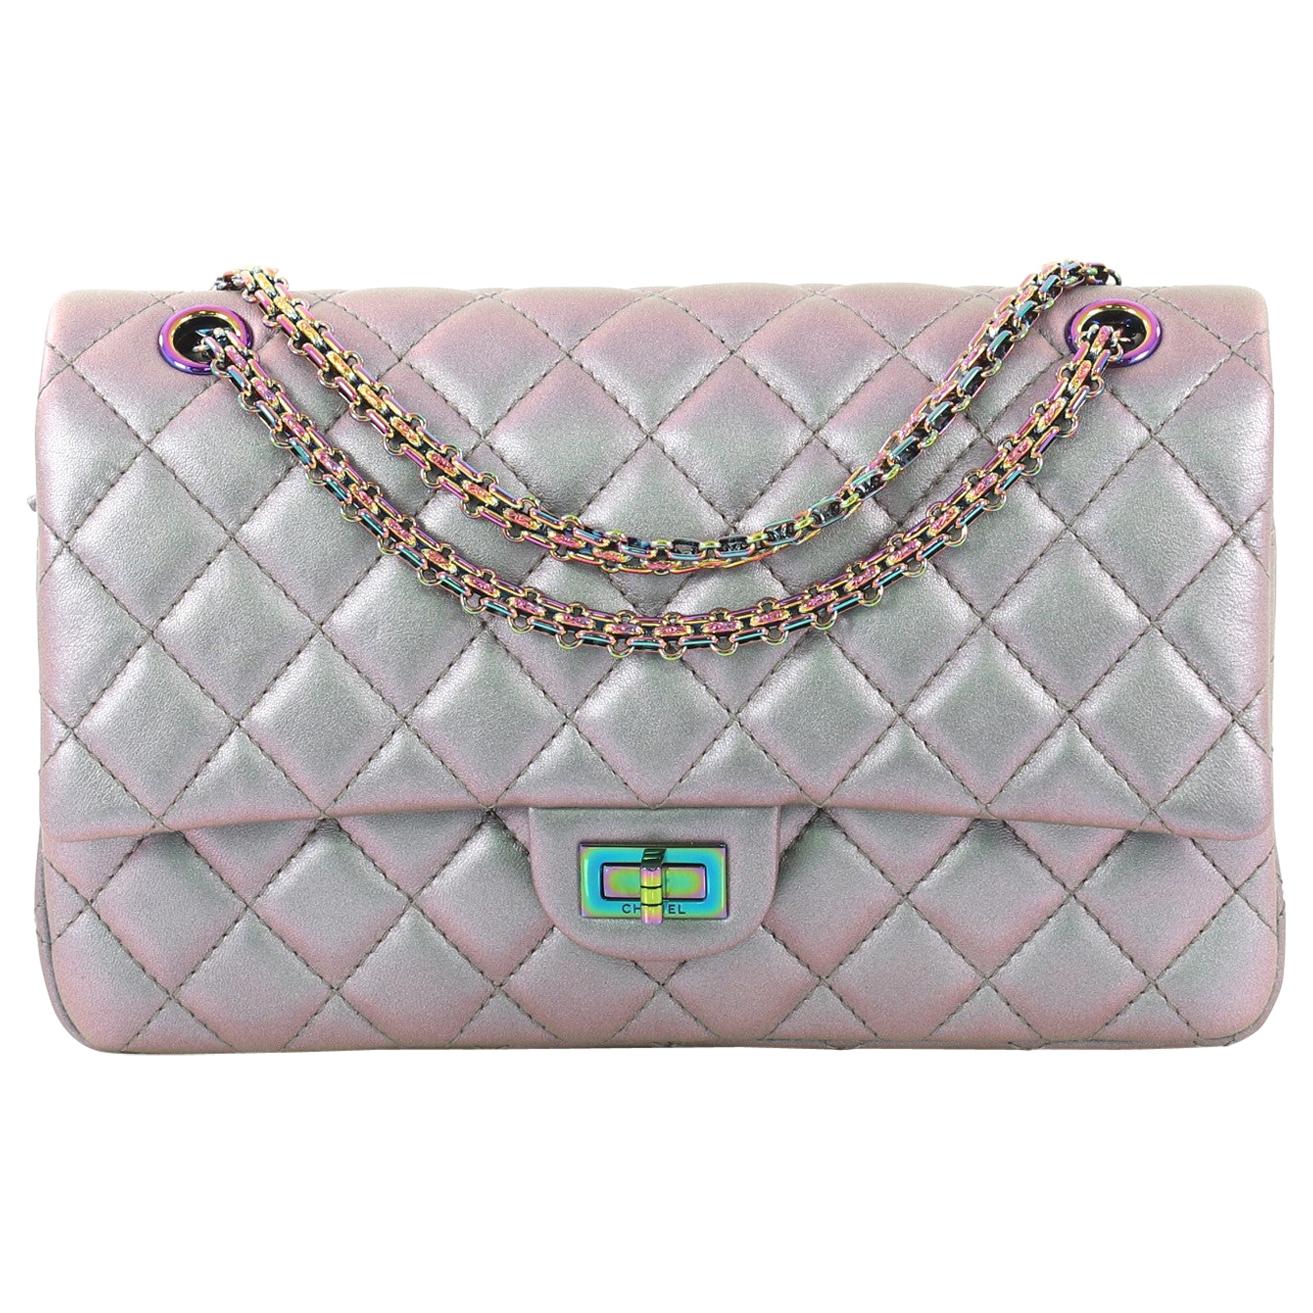 Chanel Reissue 2.55 Flap Bag Quilted Iridescent Lambskin 226